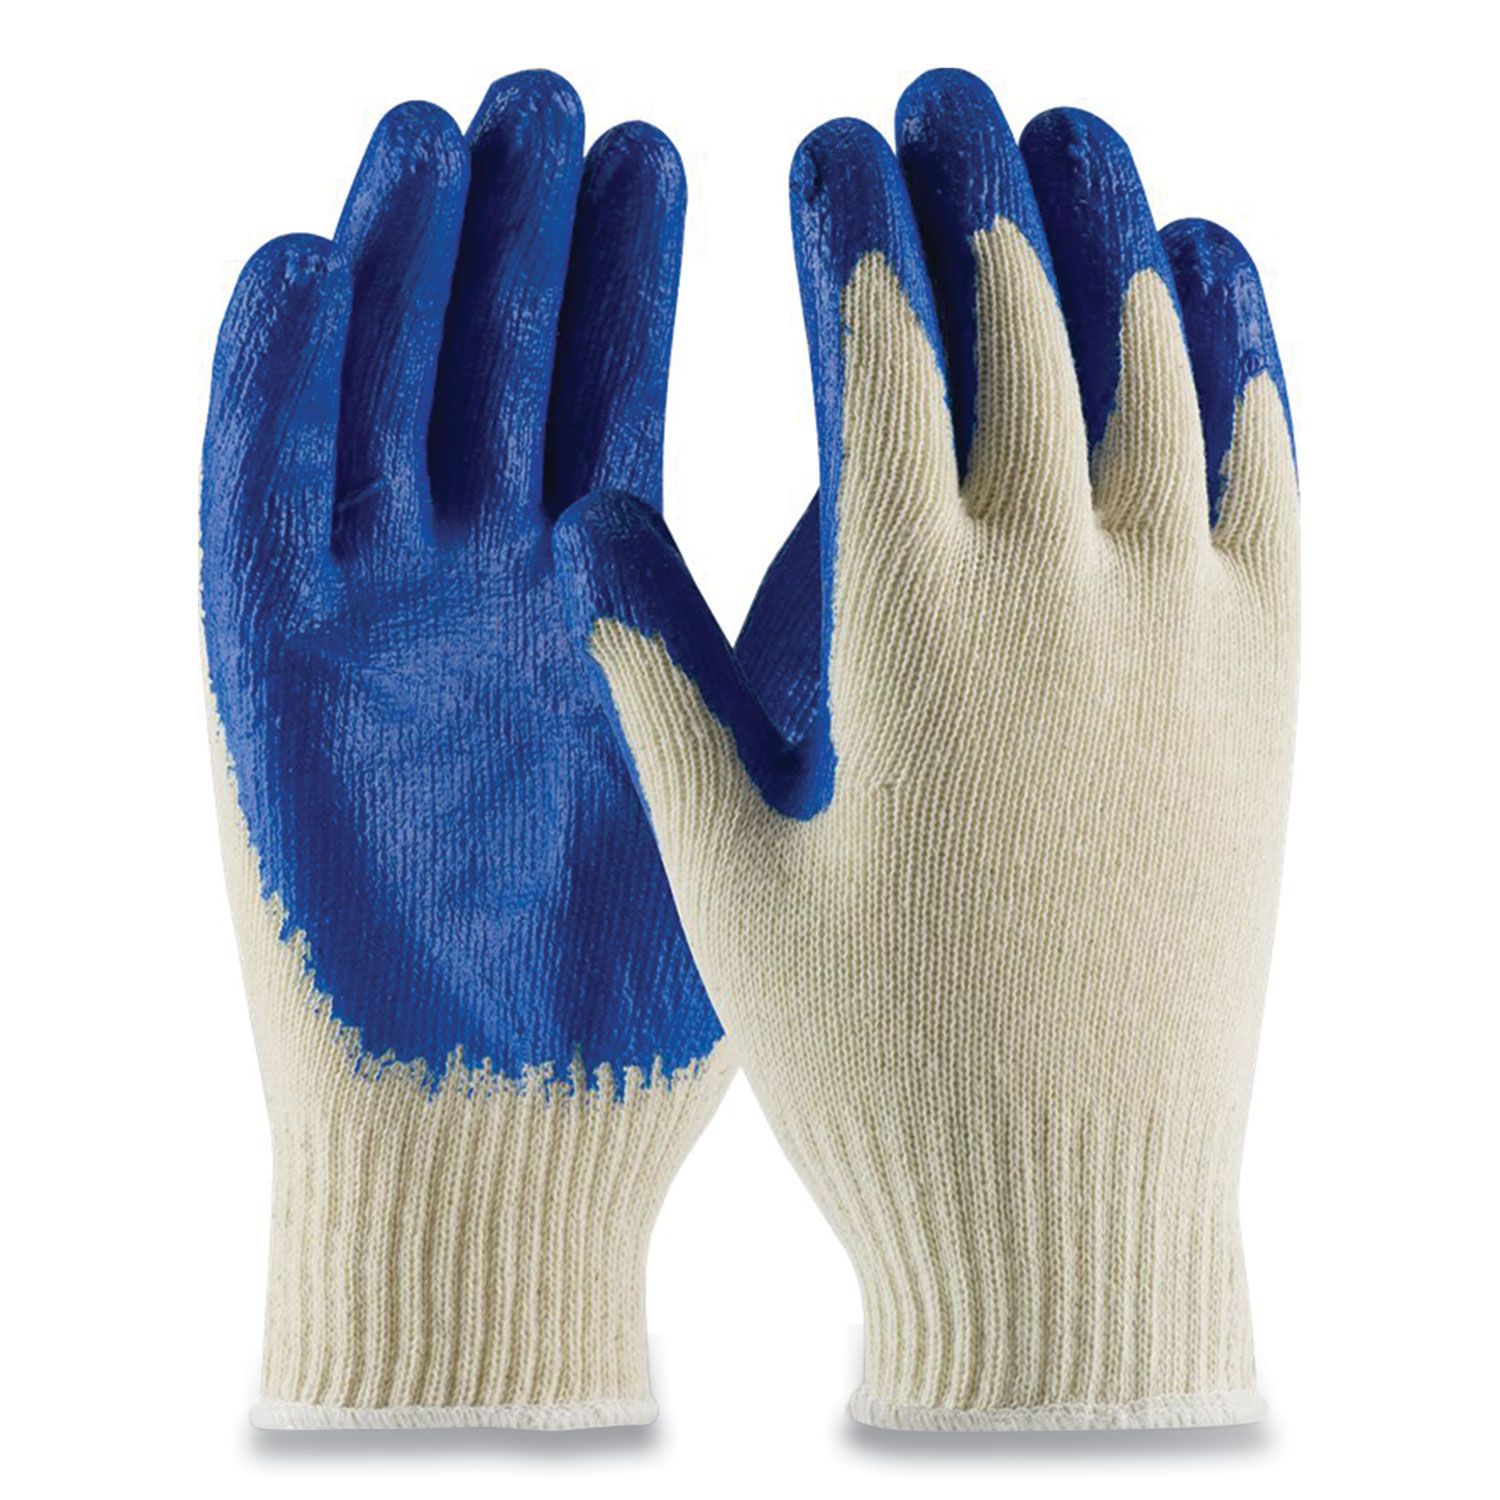  PIP 39-C122/S Seamless Knit Cotton/Polyester Gloves, Regular Grade, Small, White/Blue, 12 Pairs (PID179960) 